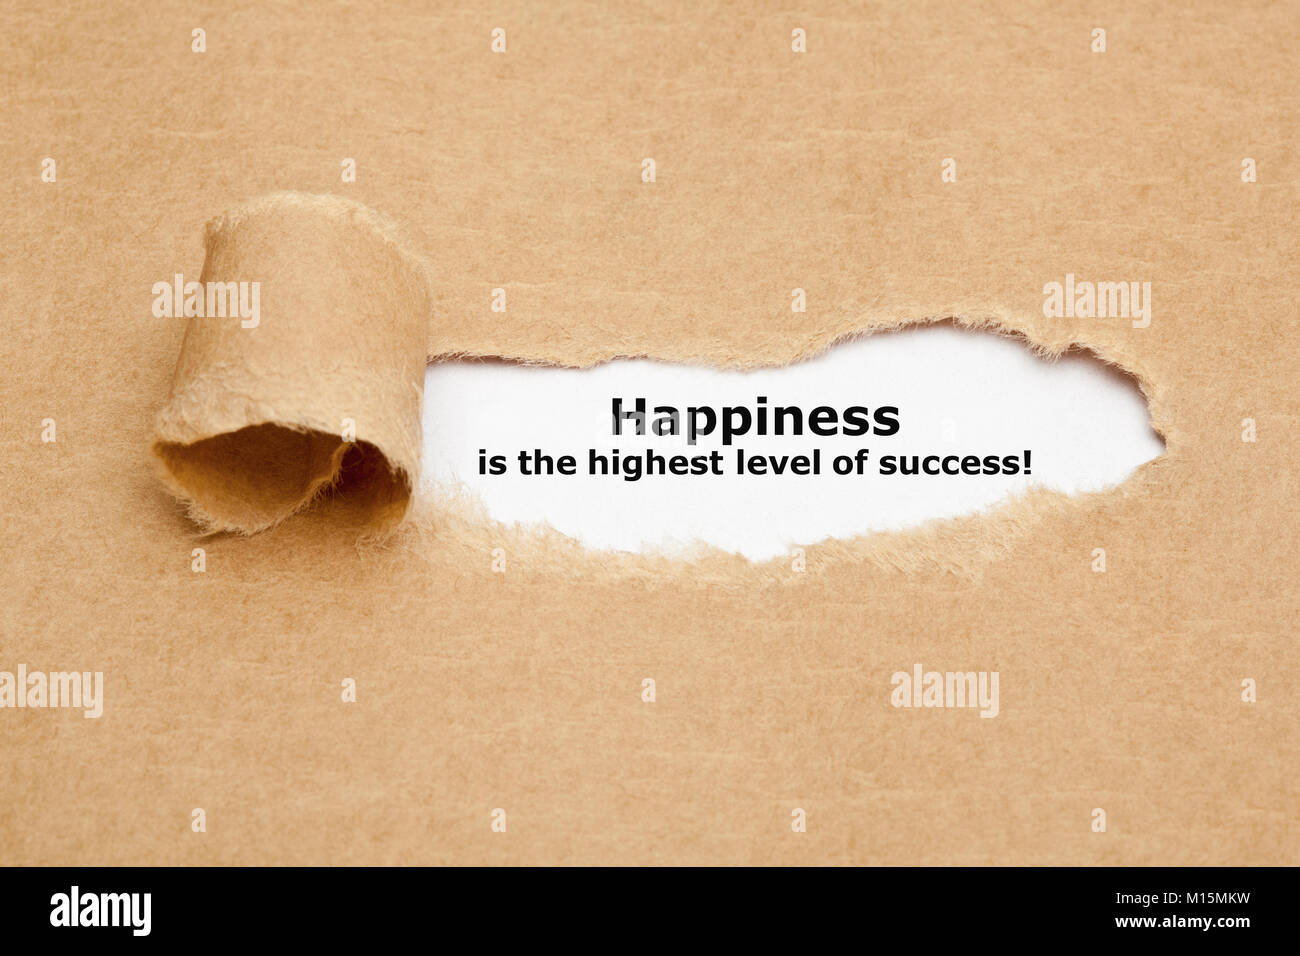 Happiness Is The Highest Level Of Success appearing behind torn paper. Stock Photo